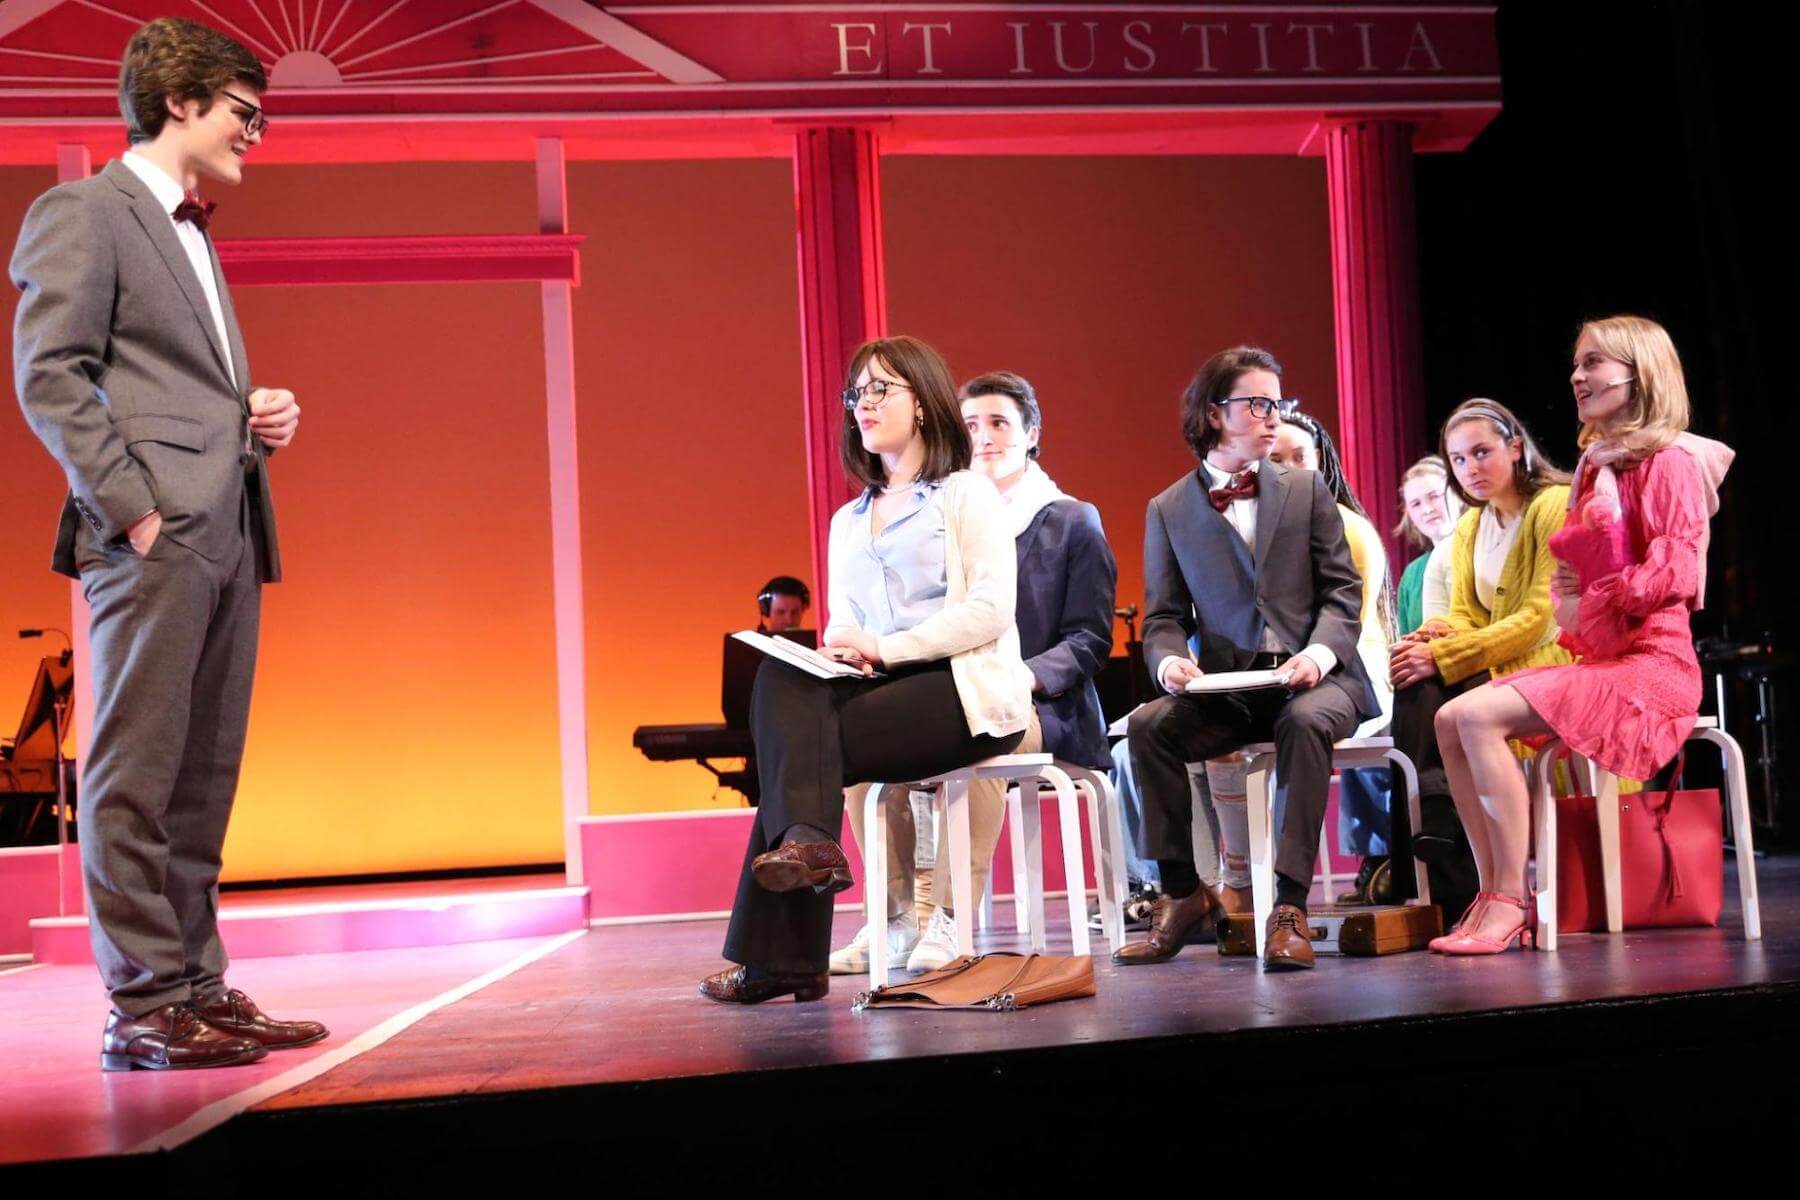 A group of Ethical Culture Fieldston Upper School students perform onstage in Legally Blonde.